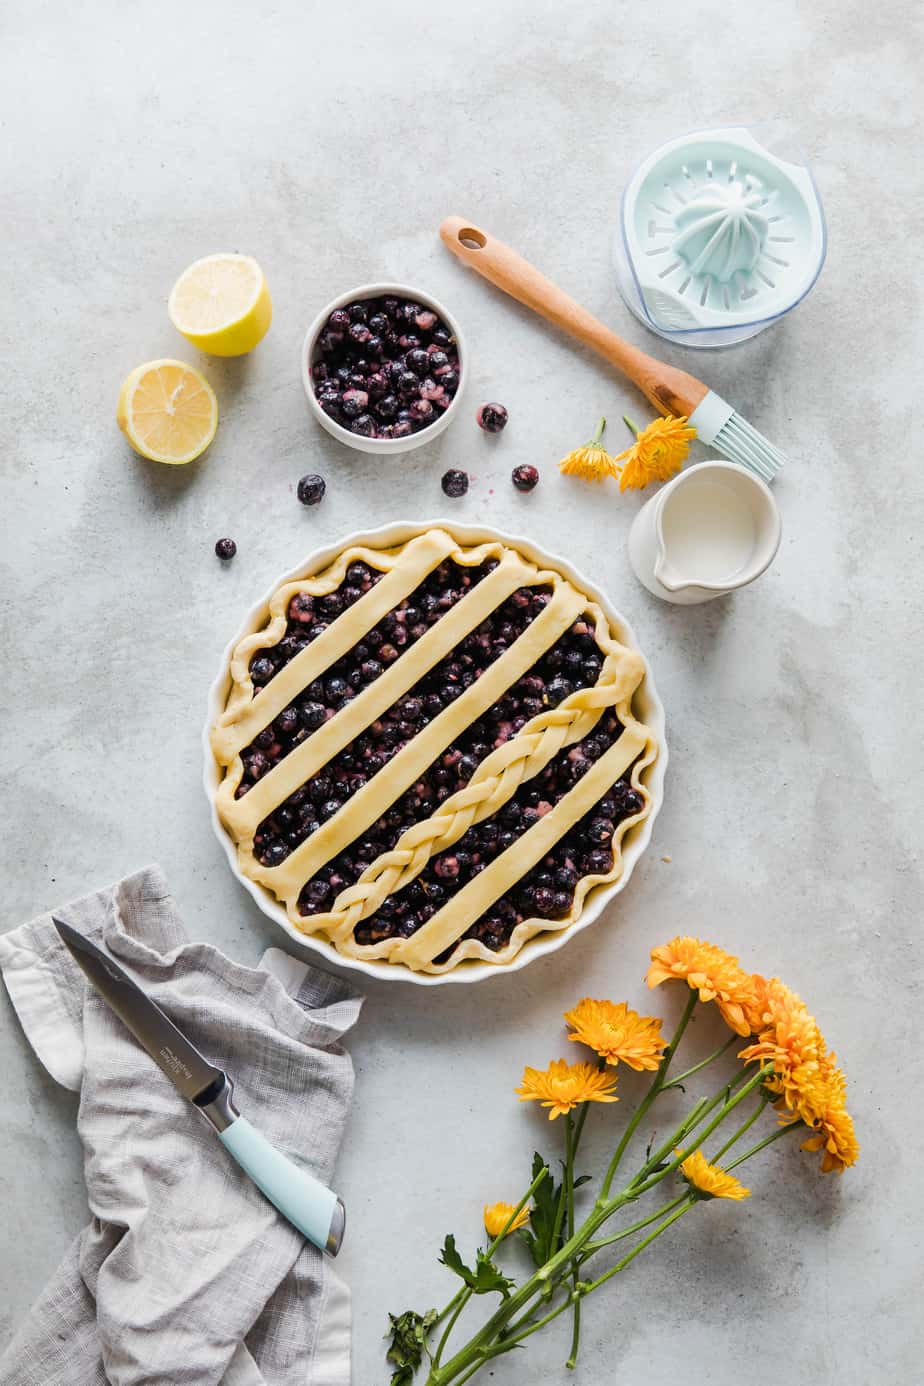 An unbaked pie with a lattice pie crust in a white dish.